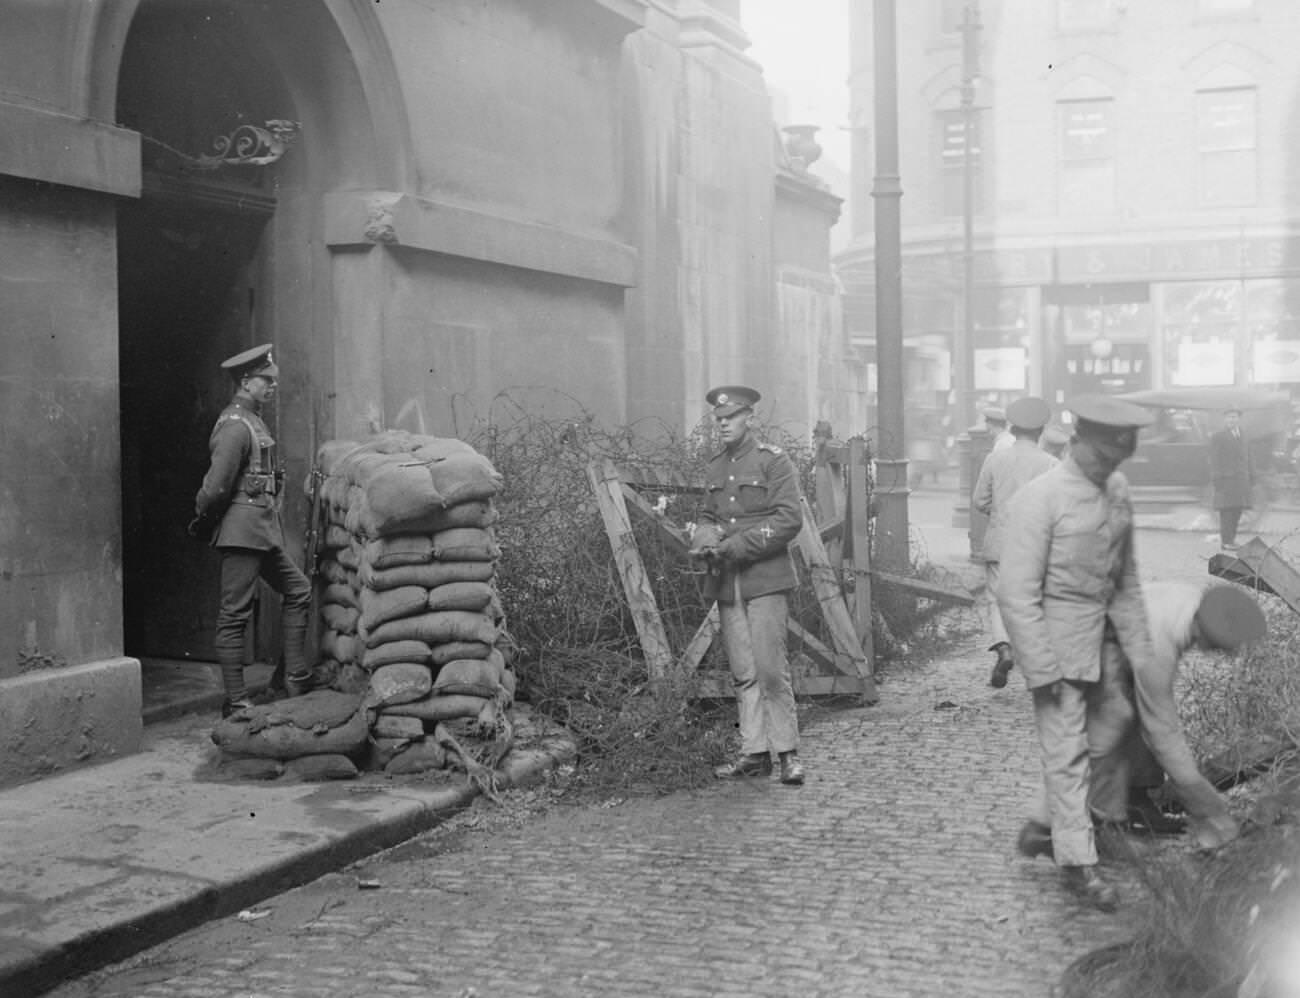 The Provisional Government of Southern Ireland takes over control of Dublin Castle with troops removing the barbed wire from an approach to the castle, 1922.